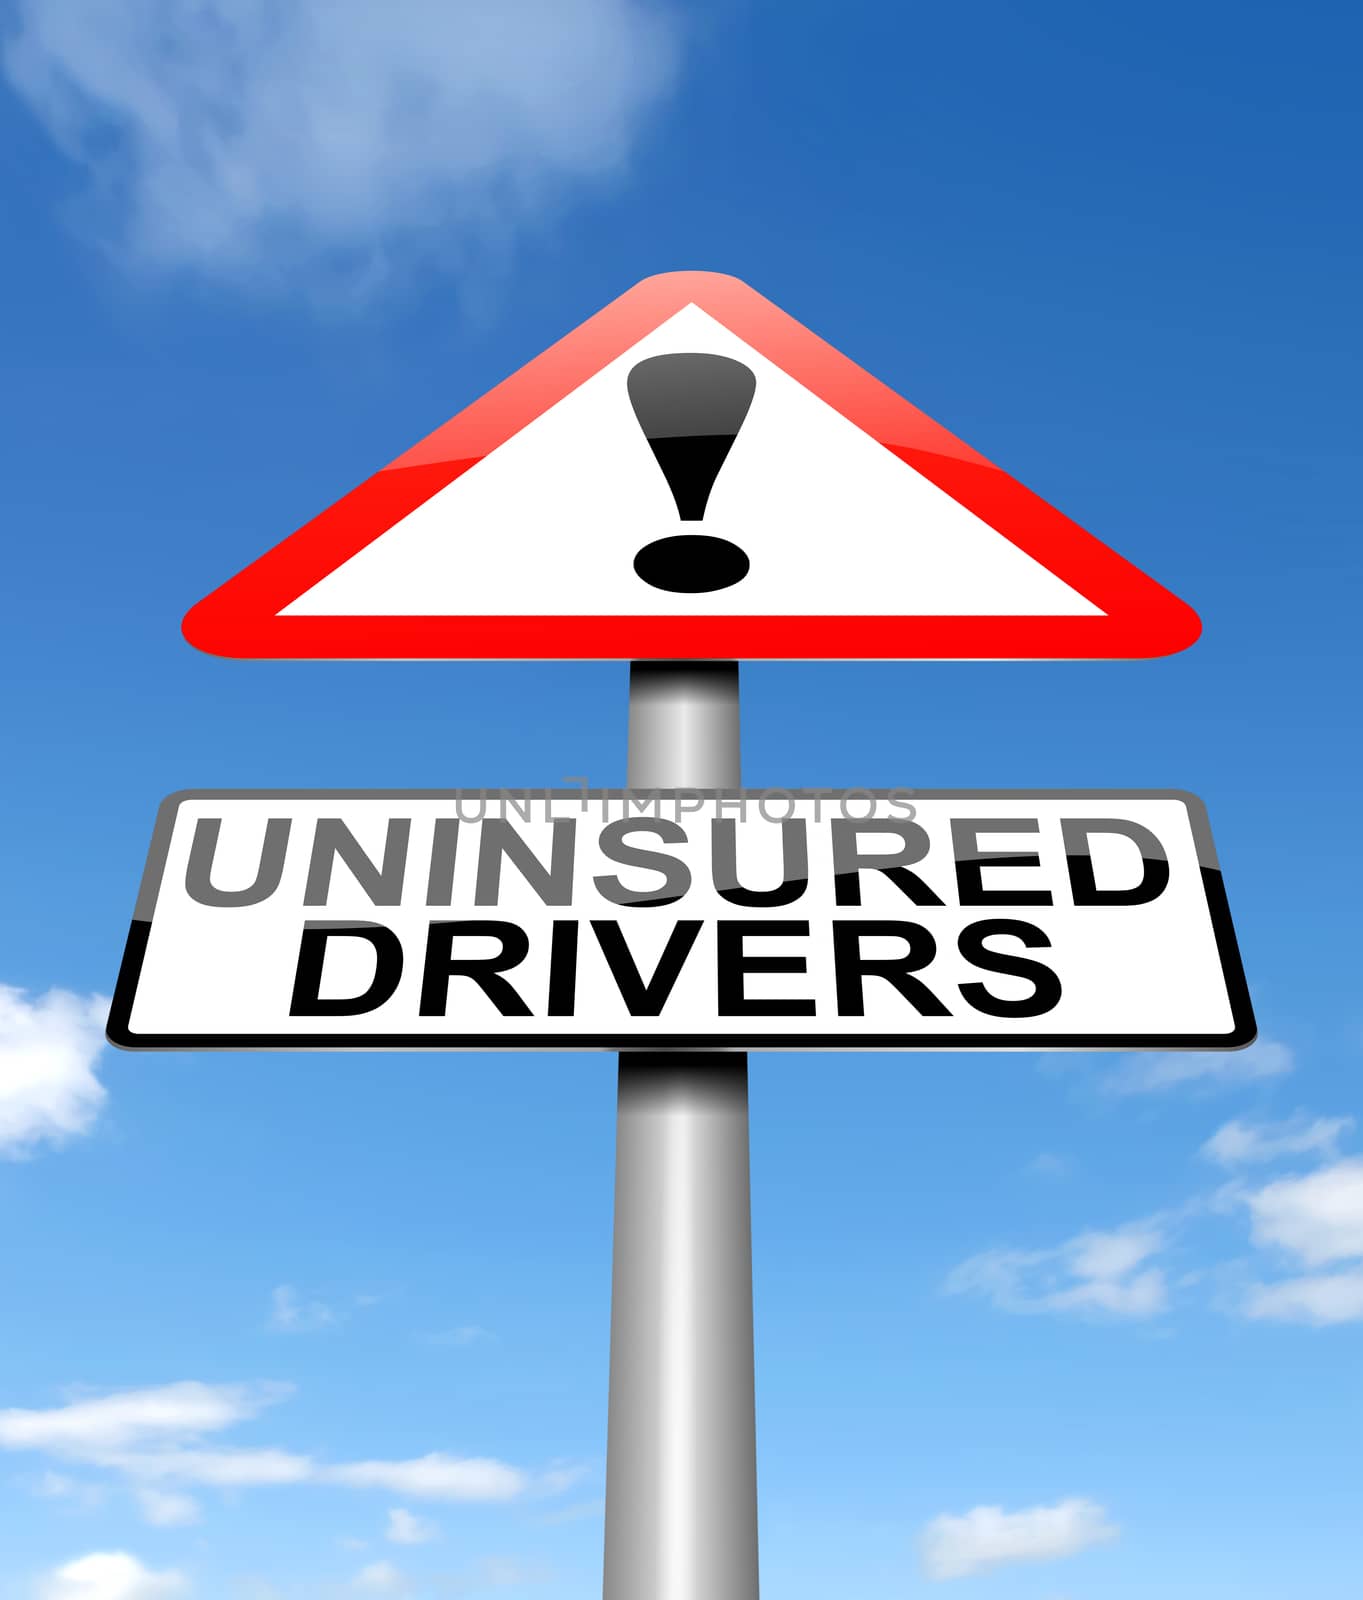 Uninsured drivers concept. by 72soul